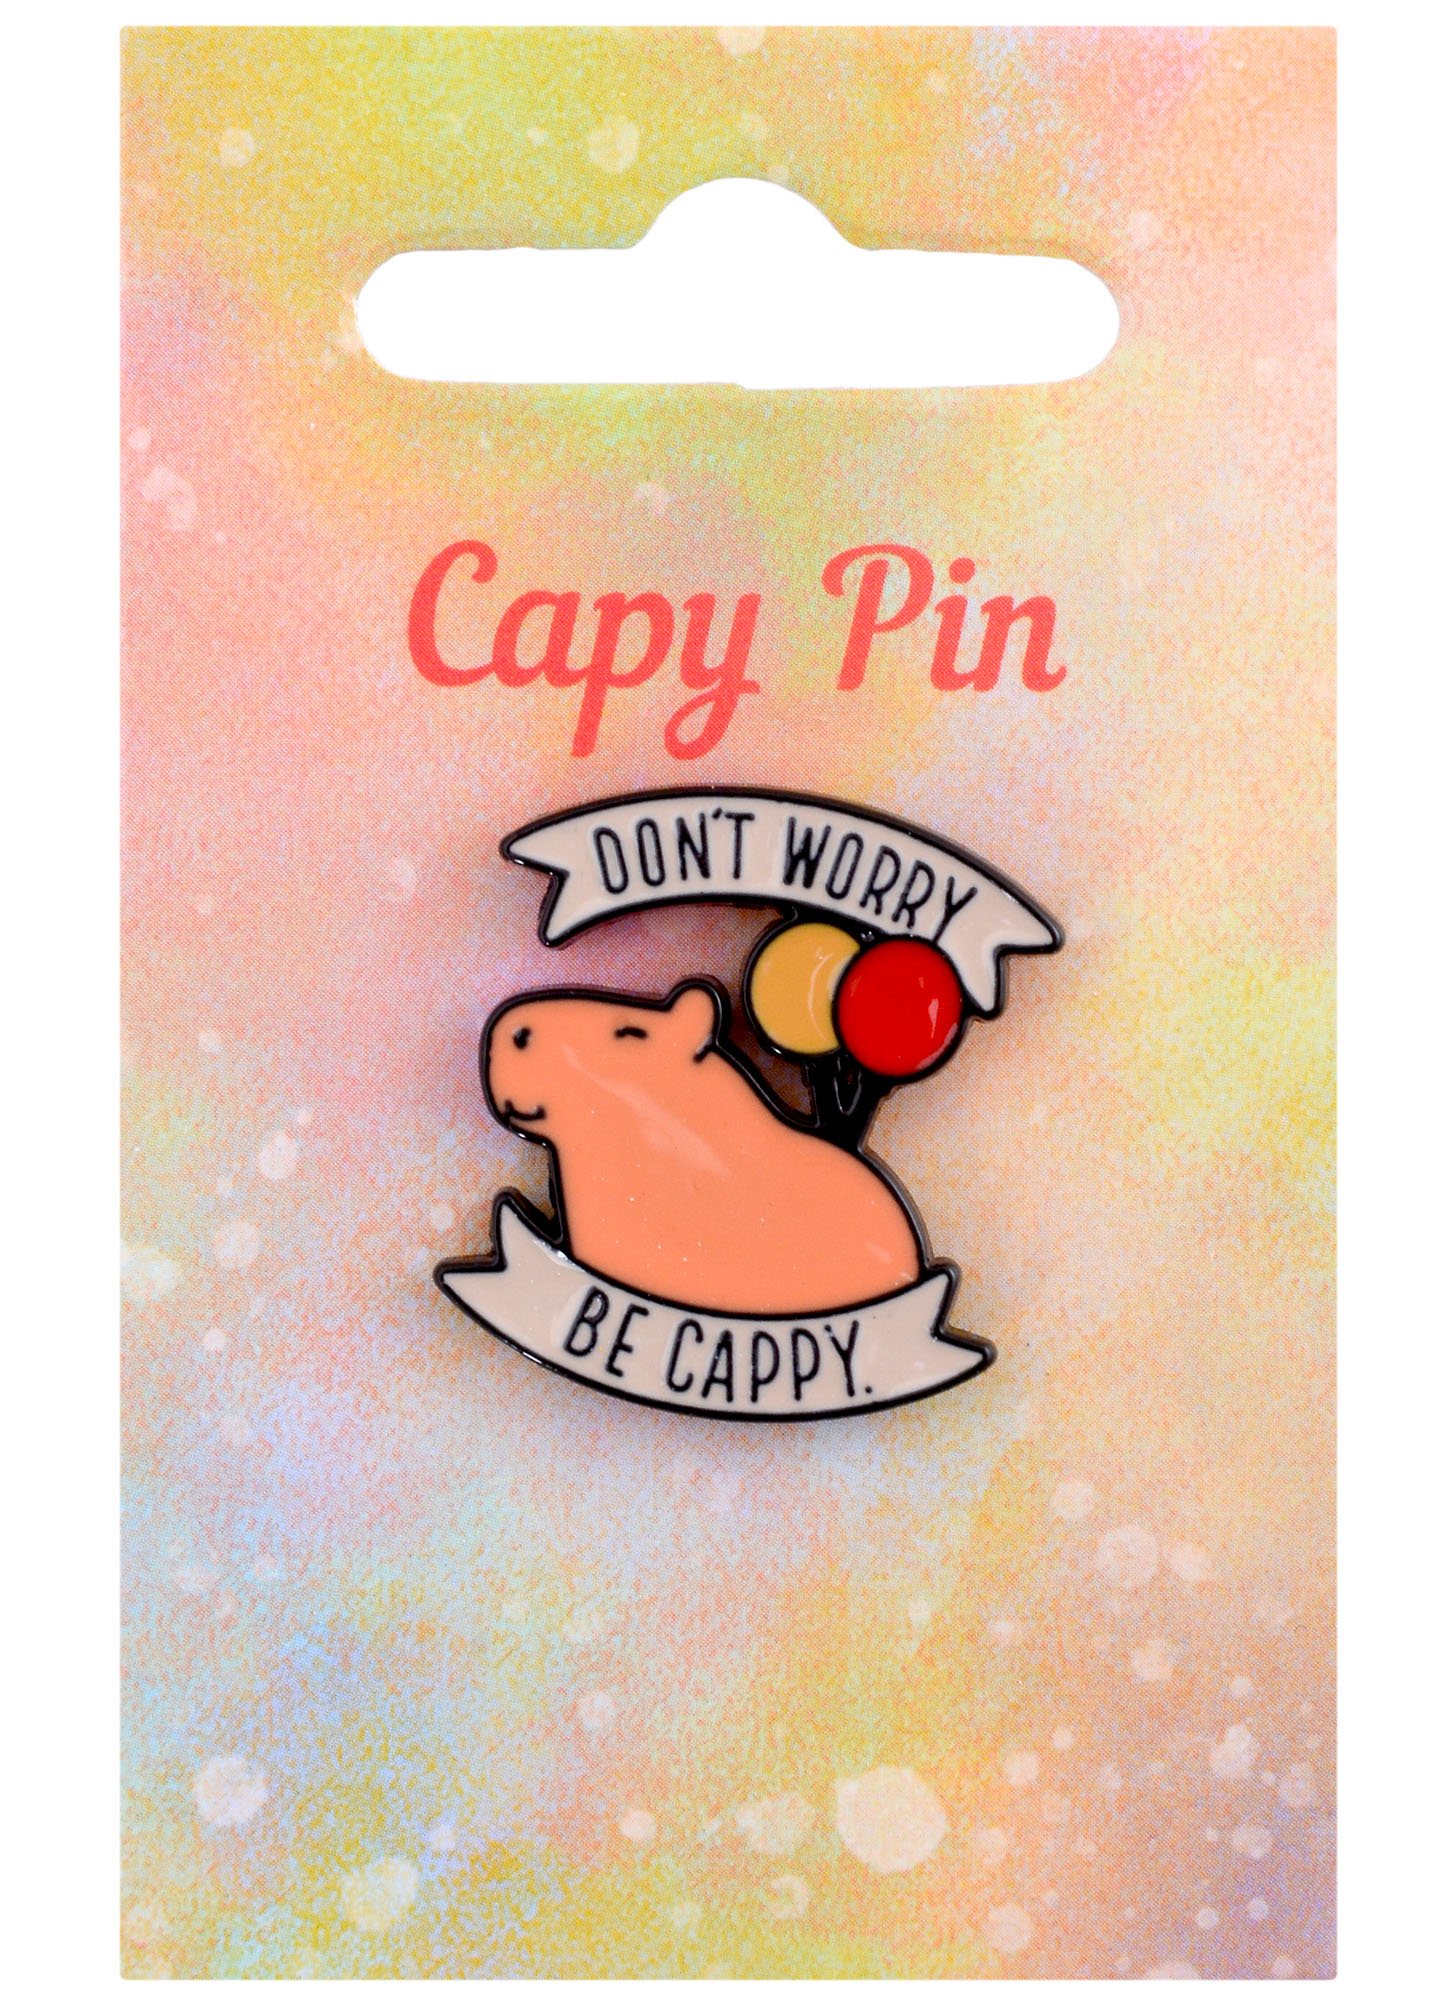   Dont Worry Be Cappy ()